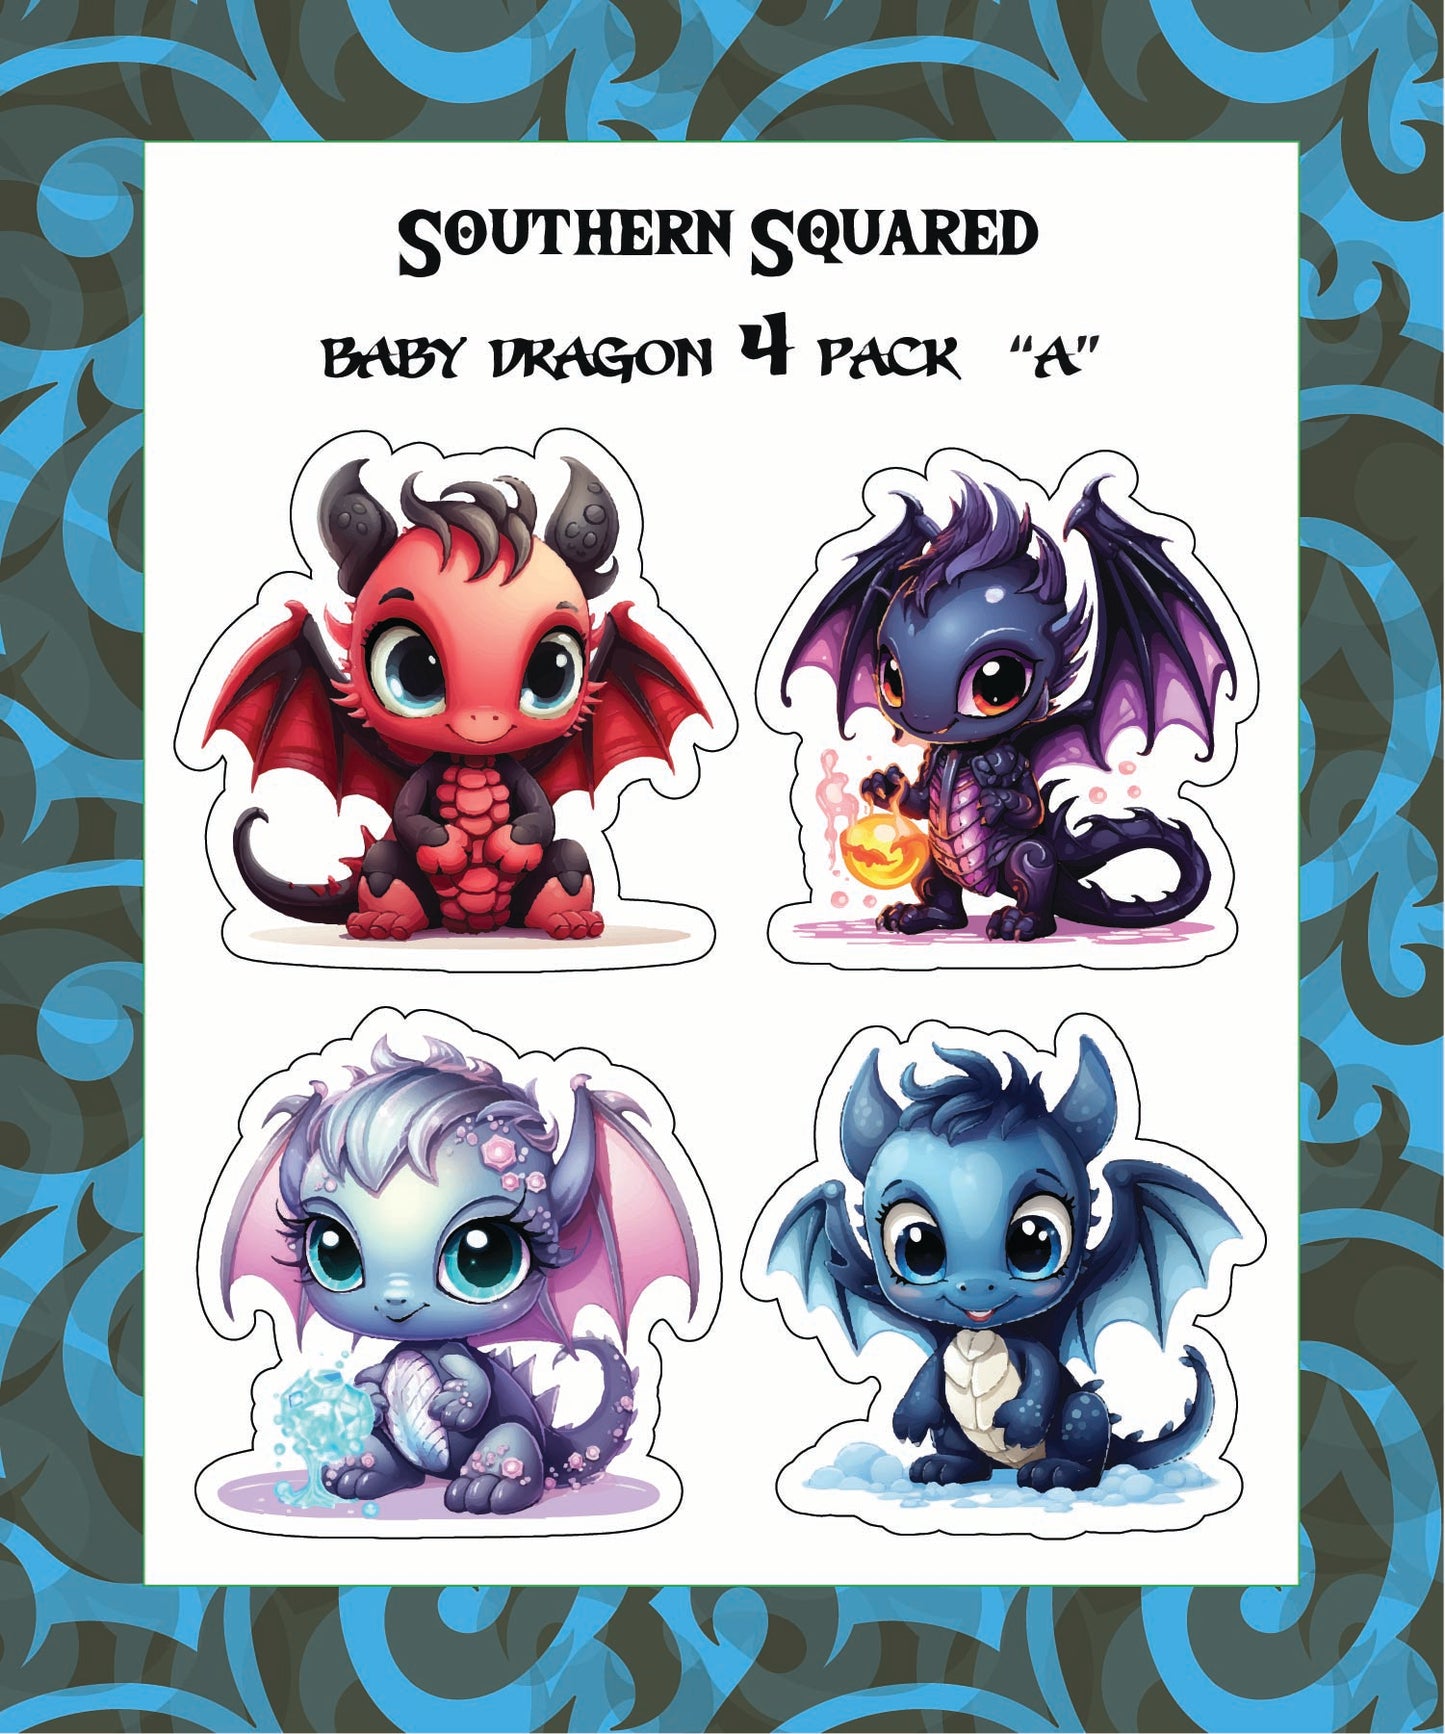 Sticker: The Adorables (Baby Dragon Sticker Pack A)